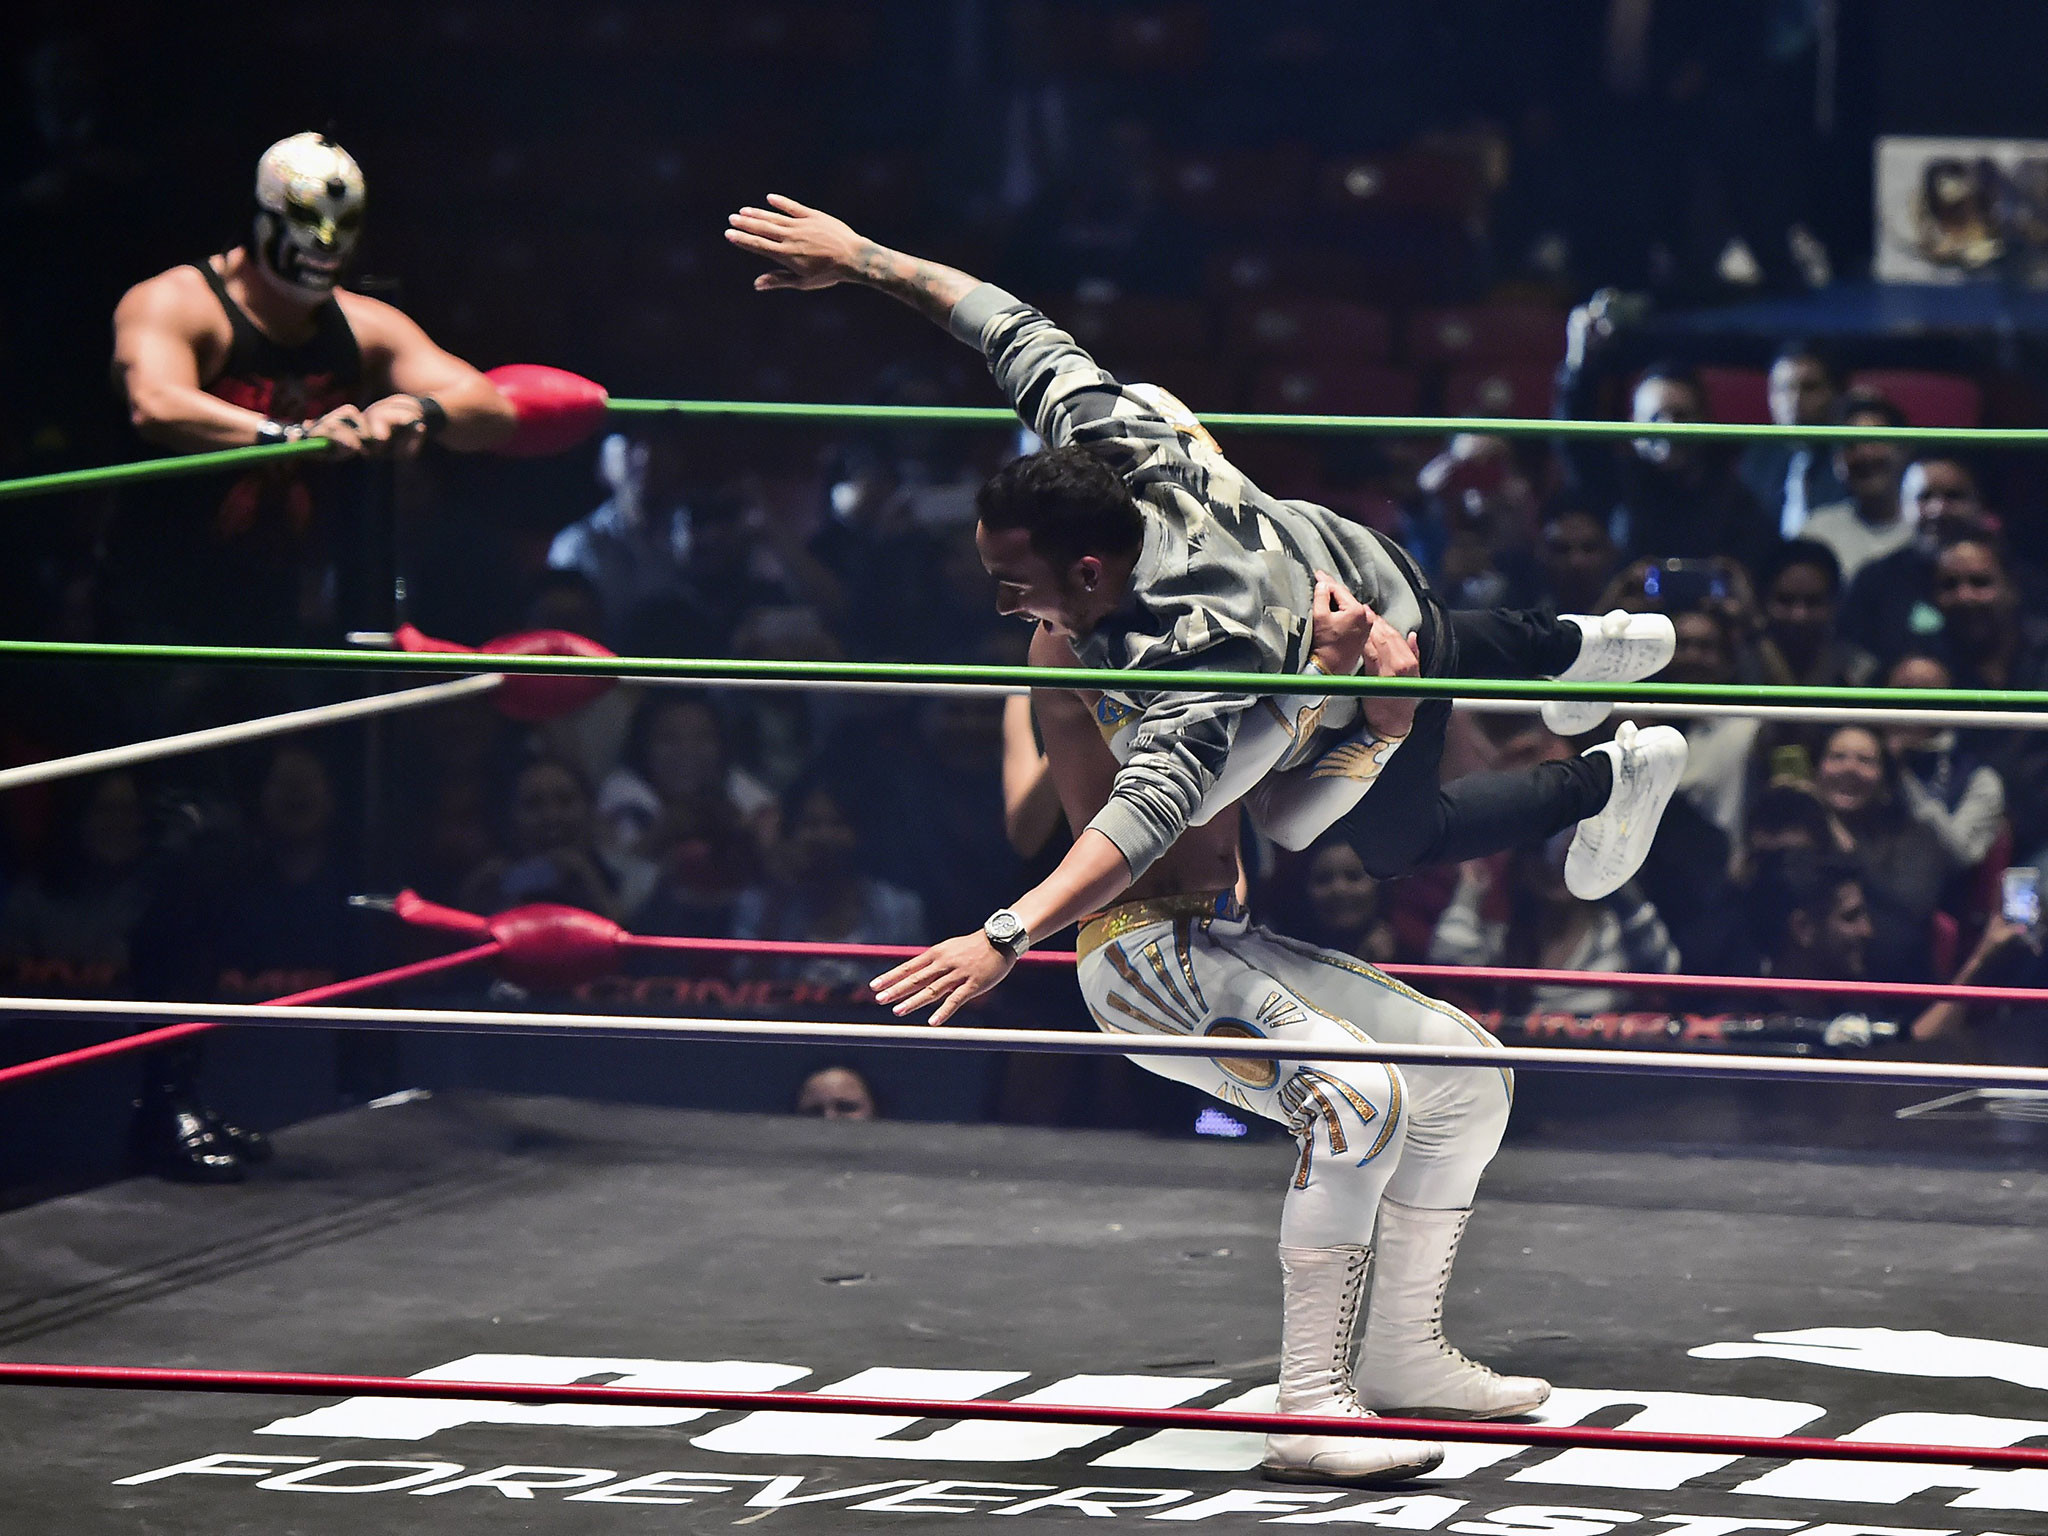 2048x1536 Lewis Hamilton storms wrestling ring and cross-body splashes opponent in  front of thousands in Mexico | The Independent